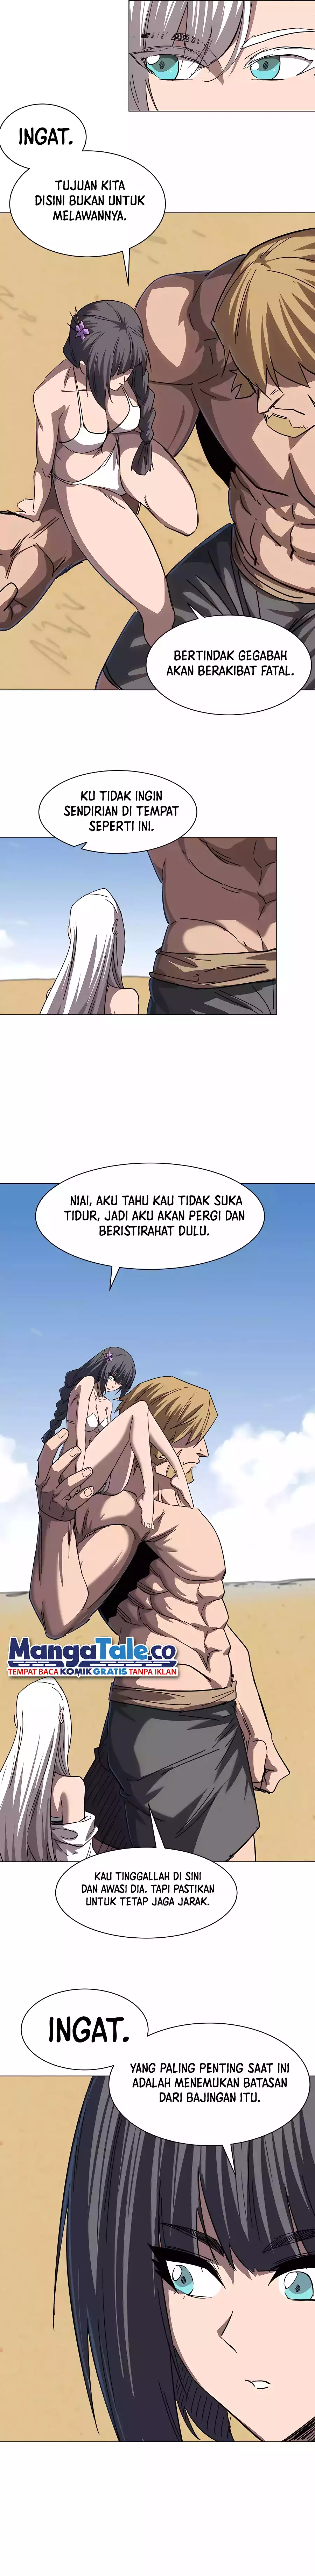 Mr. Zombie Chapter 97 Image 5